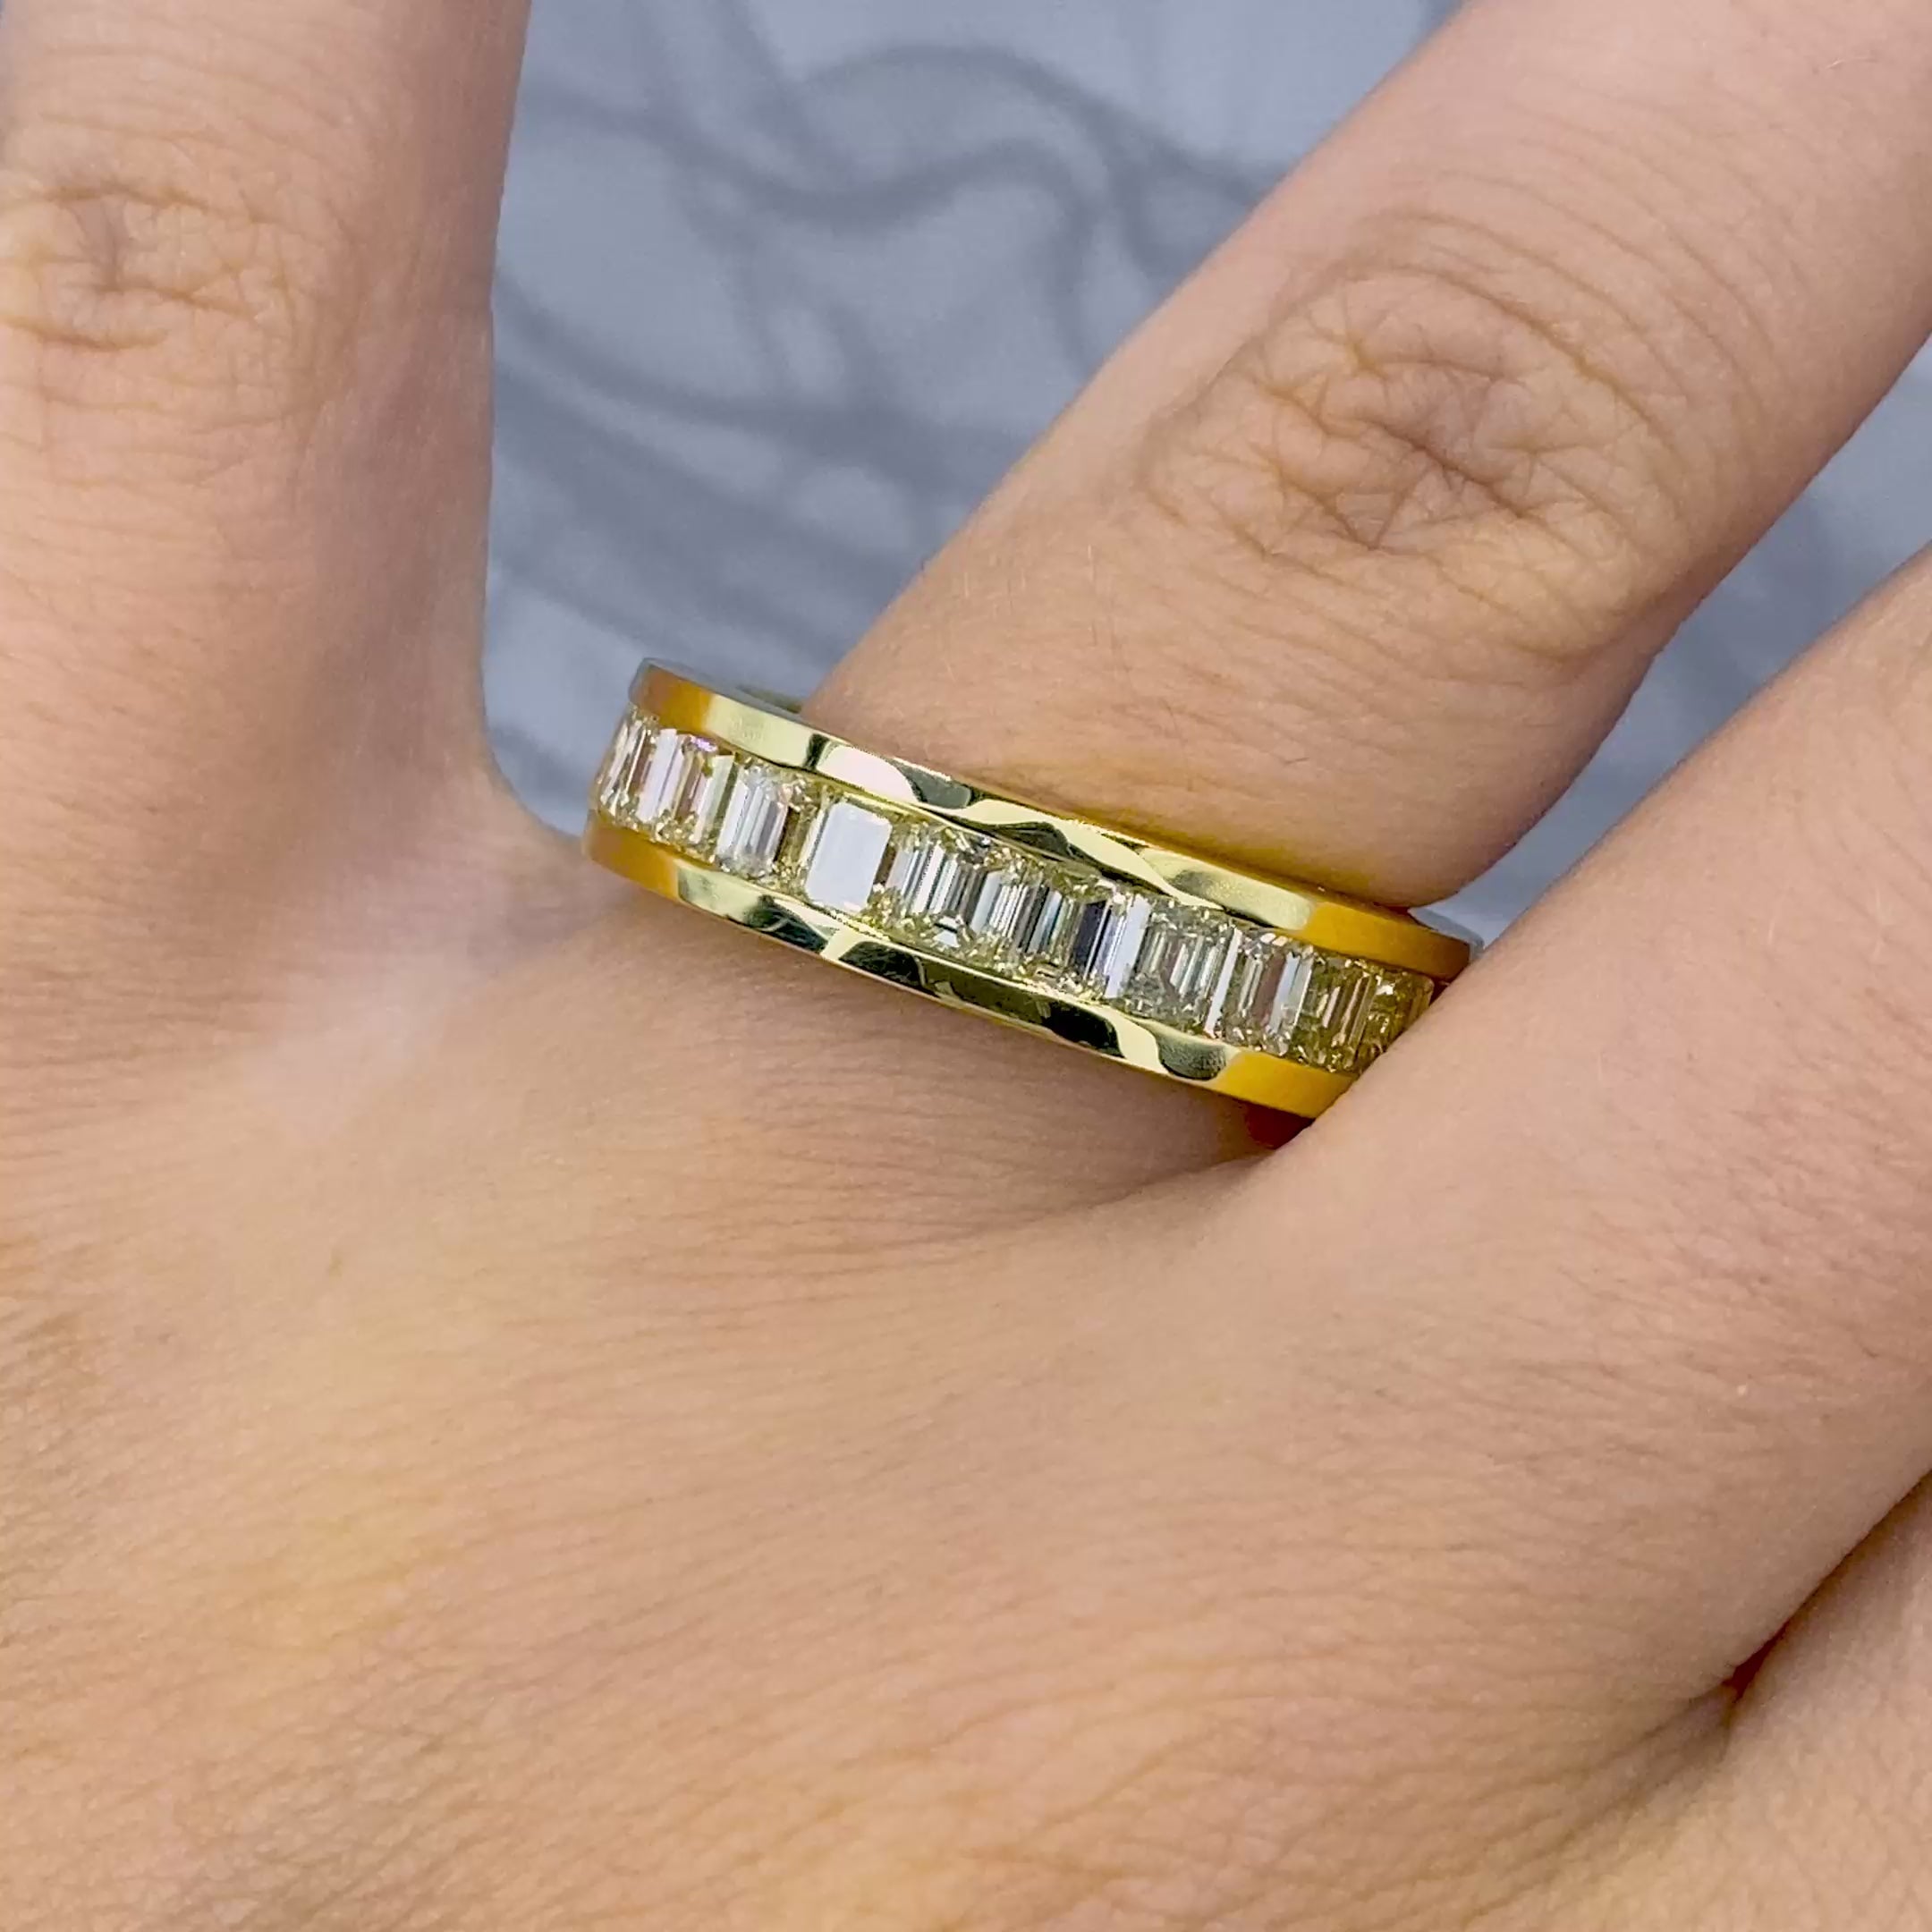 Certified 7.00CT Emerald Cut Diamond Eternity Ring in 14KT Yellow Gold